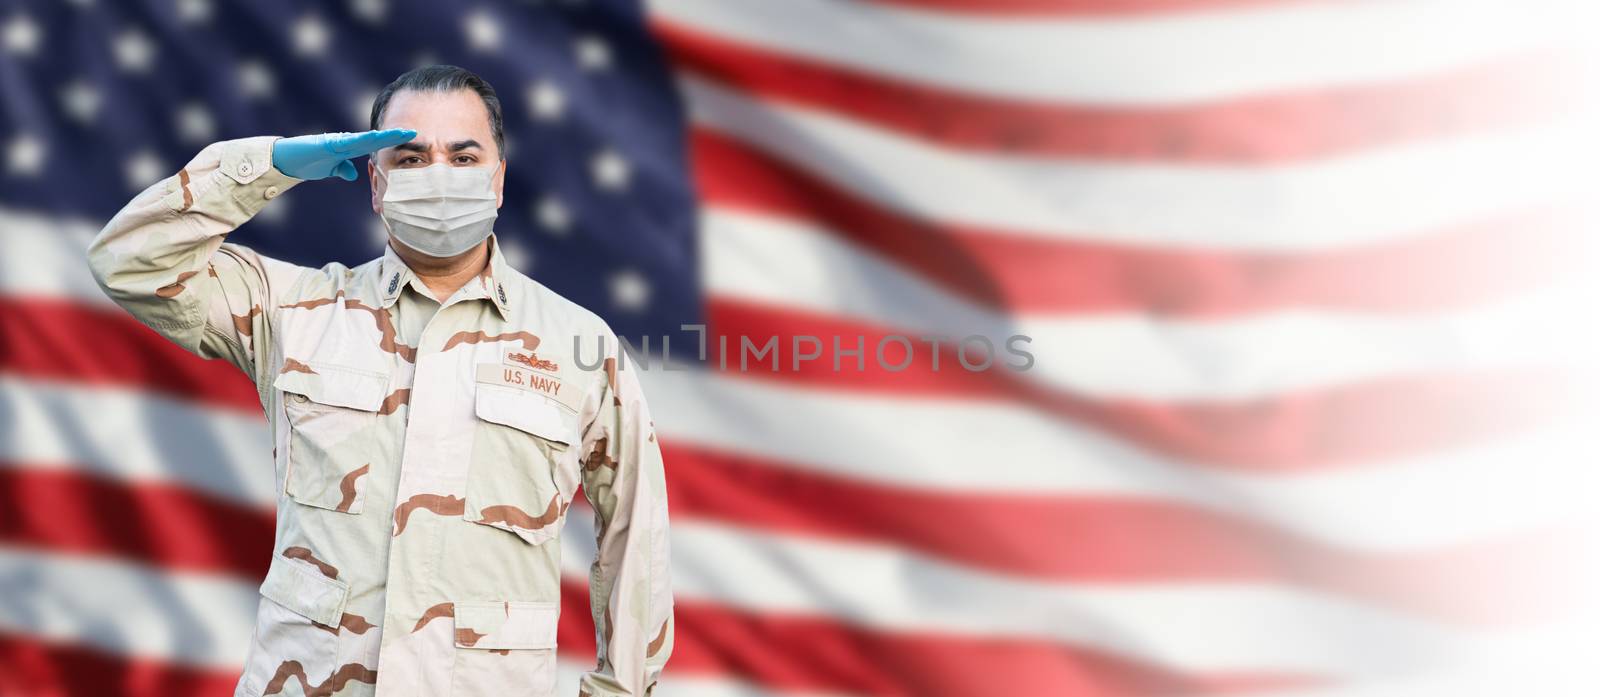 Male Navy Medical Personel Saluting Wearing Personnel Protective Equipment (PPE) With American Flag Background Banner. by Feverpitched